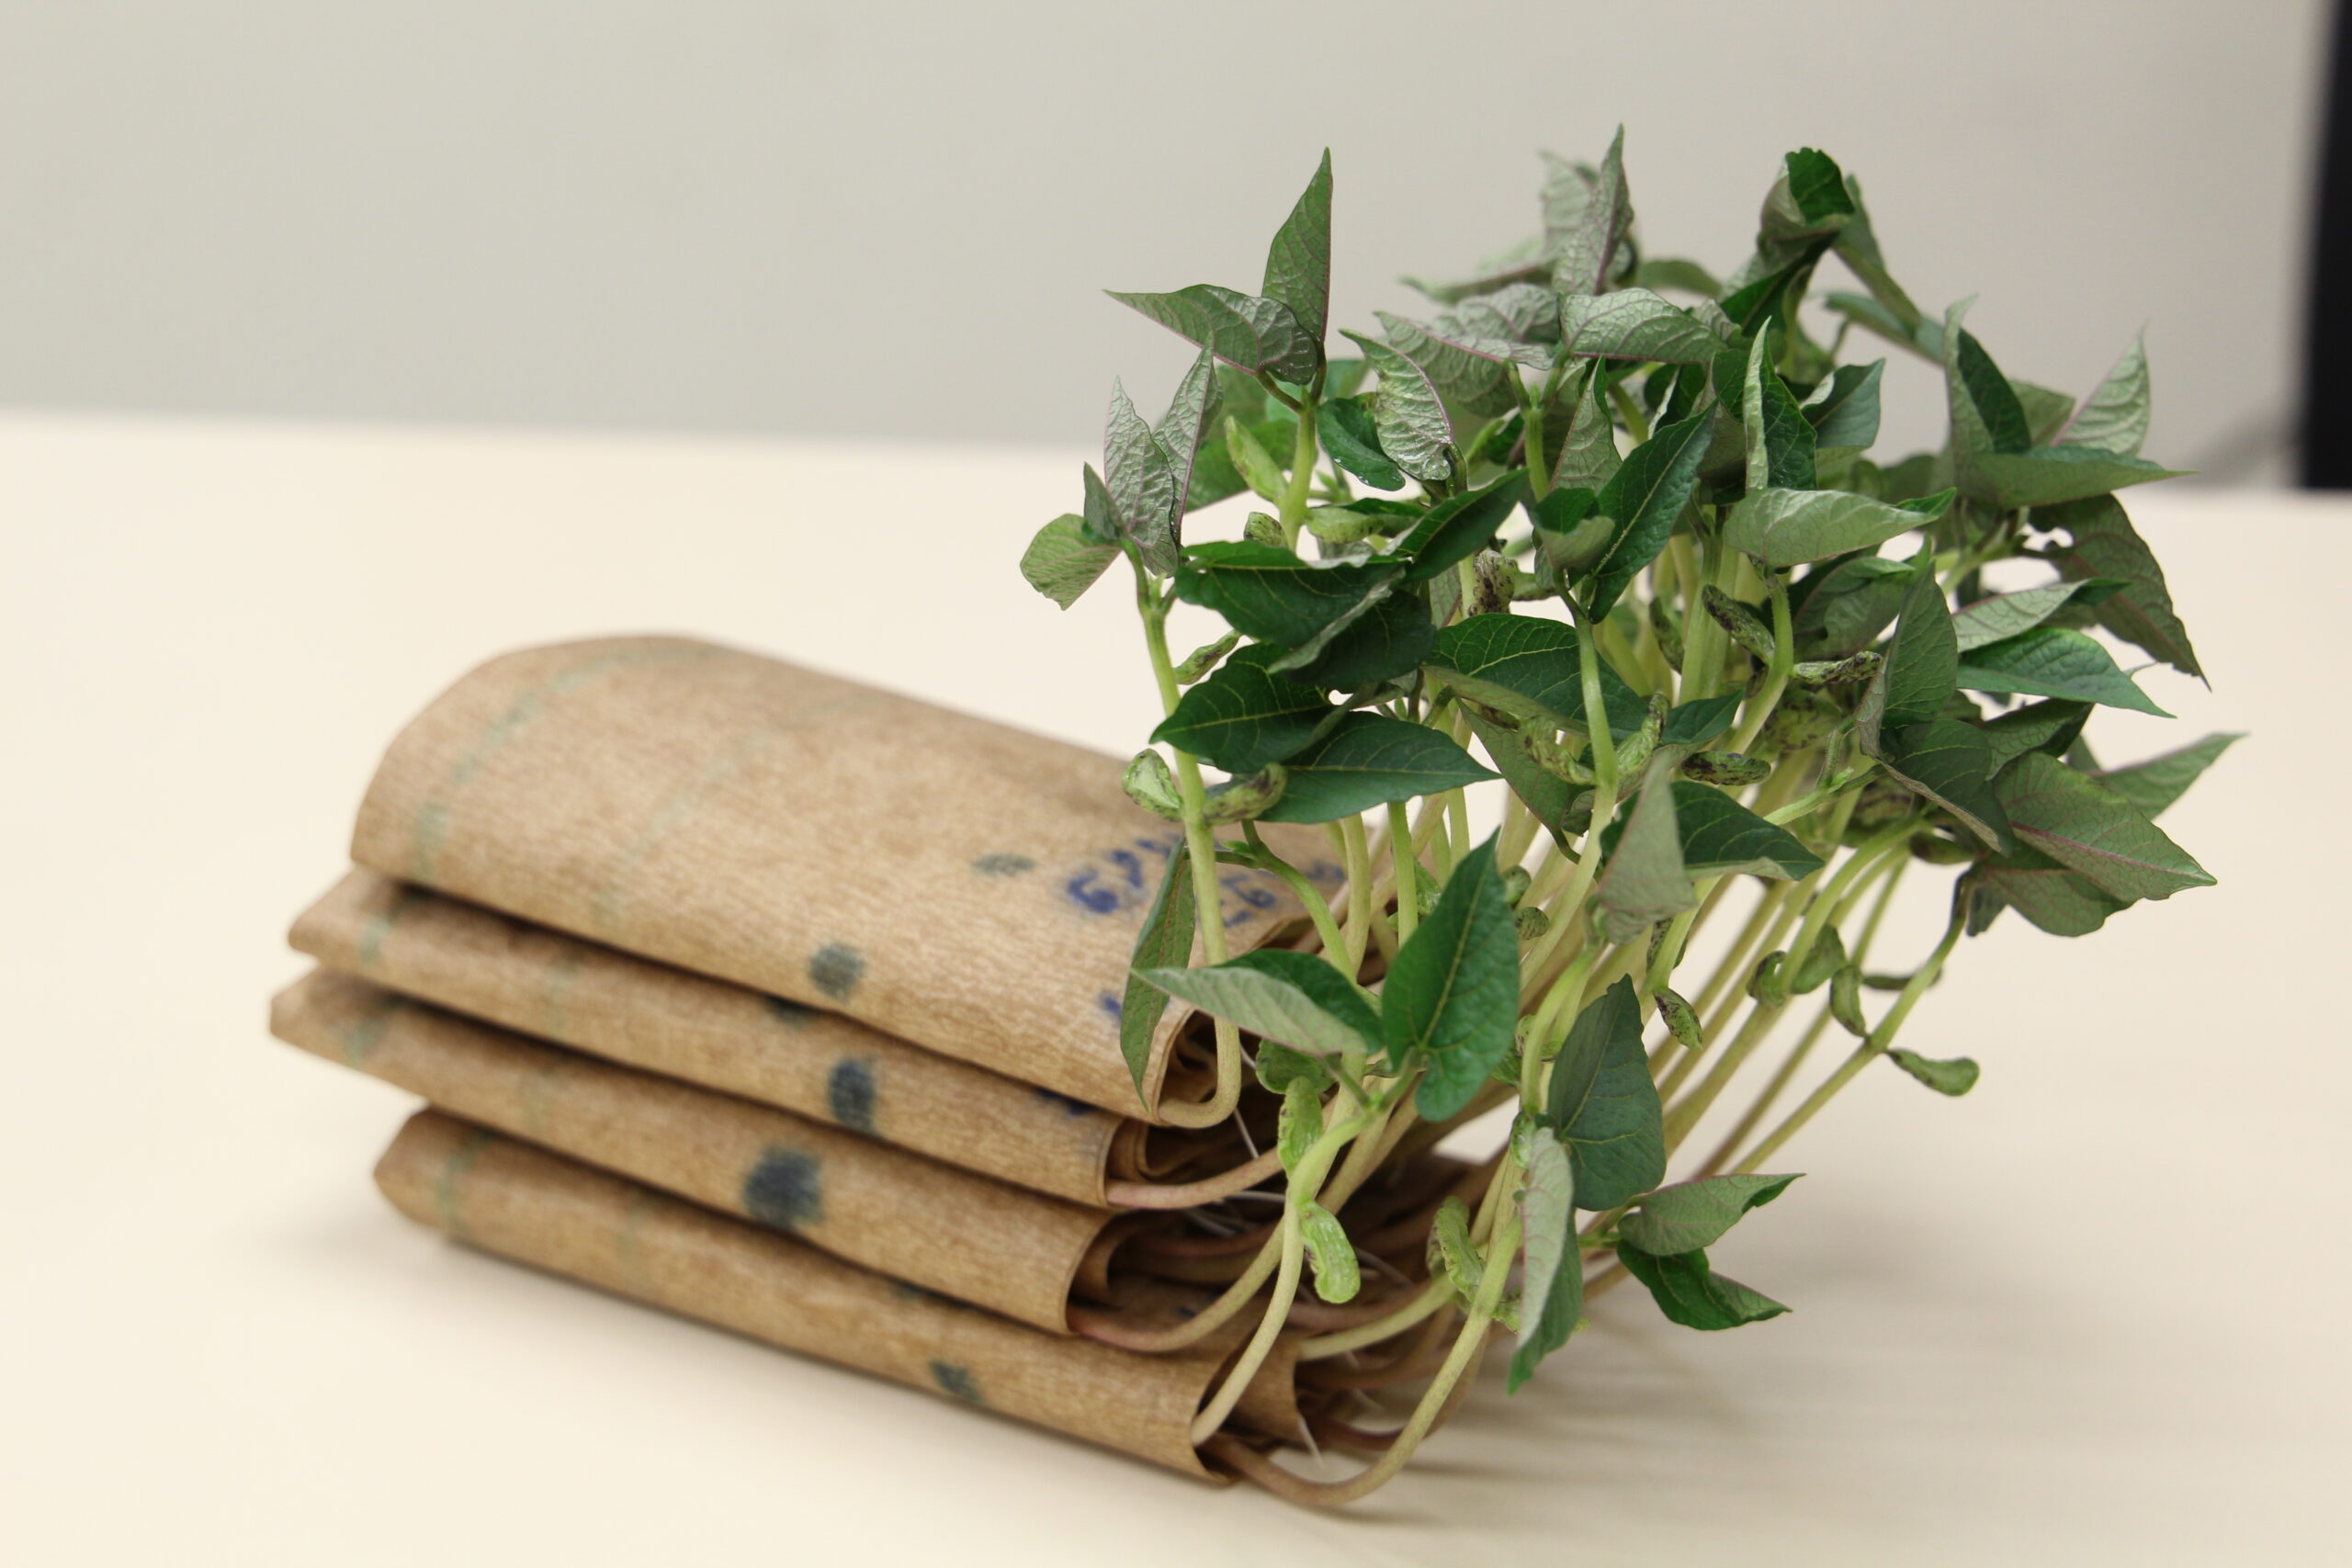 Sprouted seedlings wrapped in brown paper.